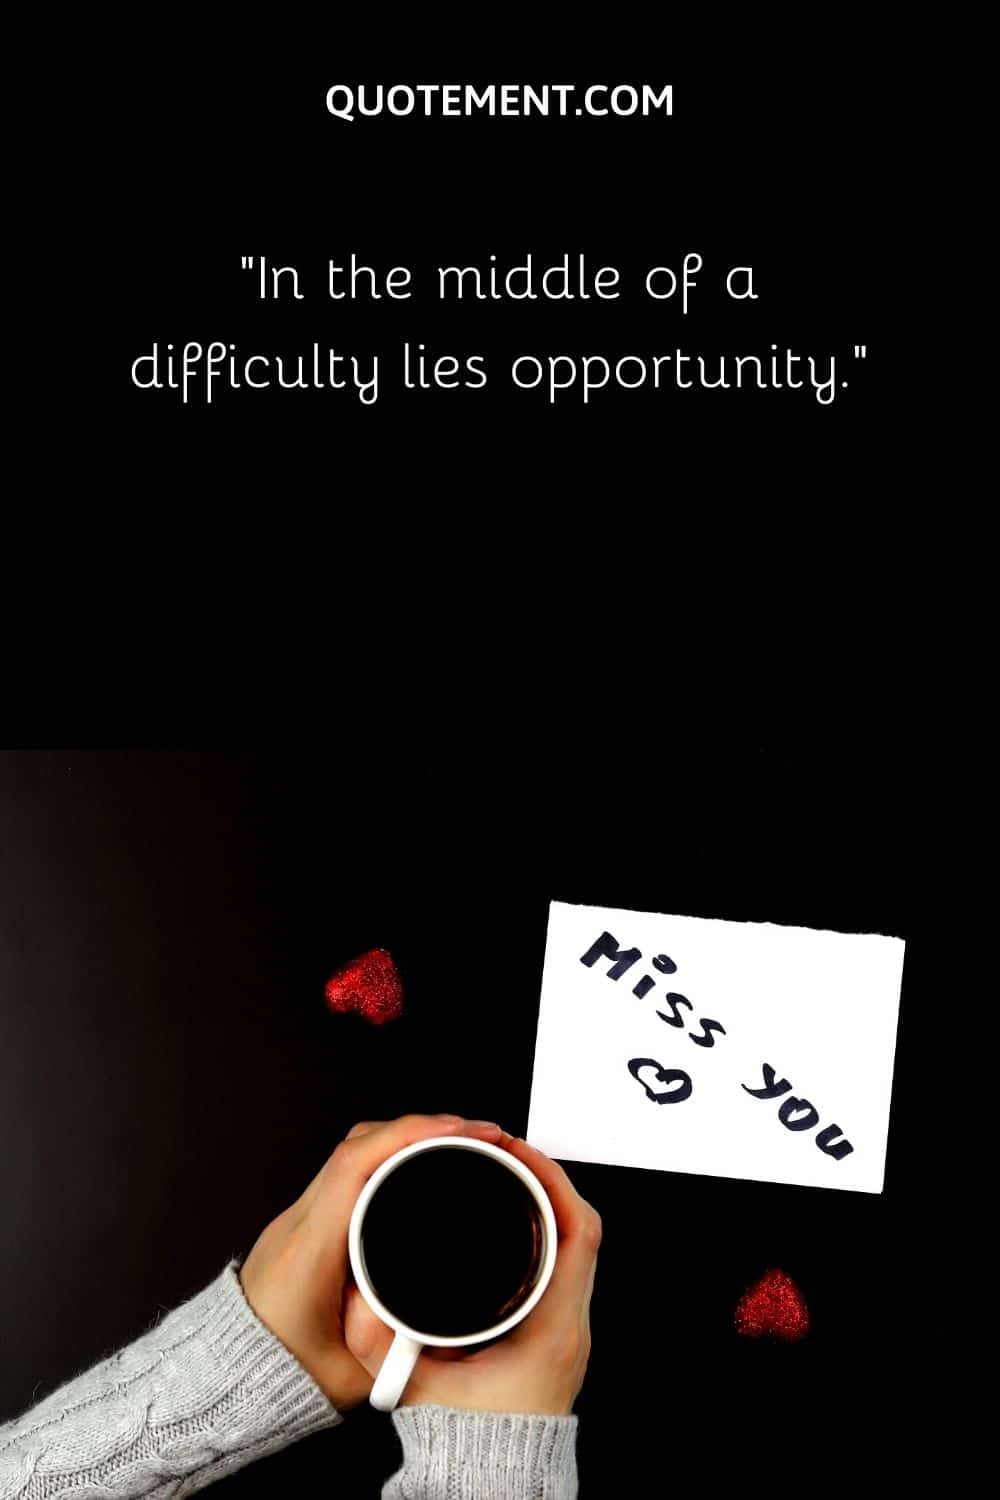 In the middle of a difficulty lies opportunity